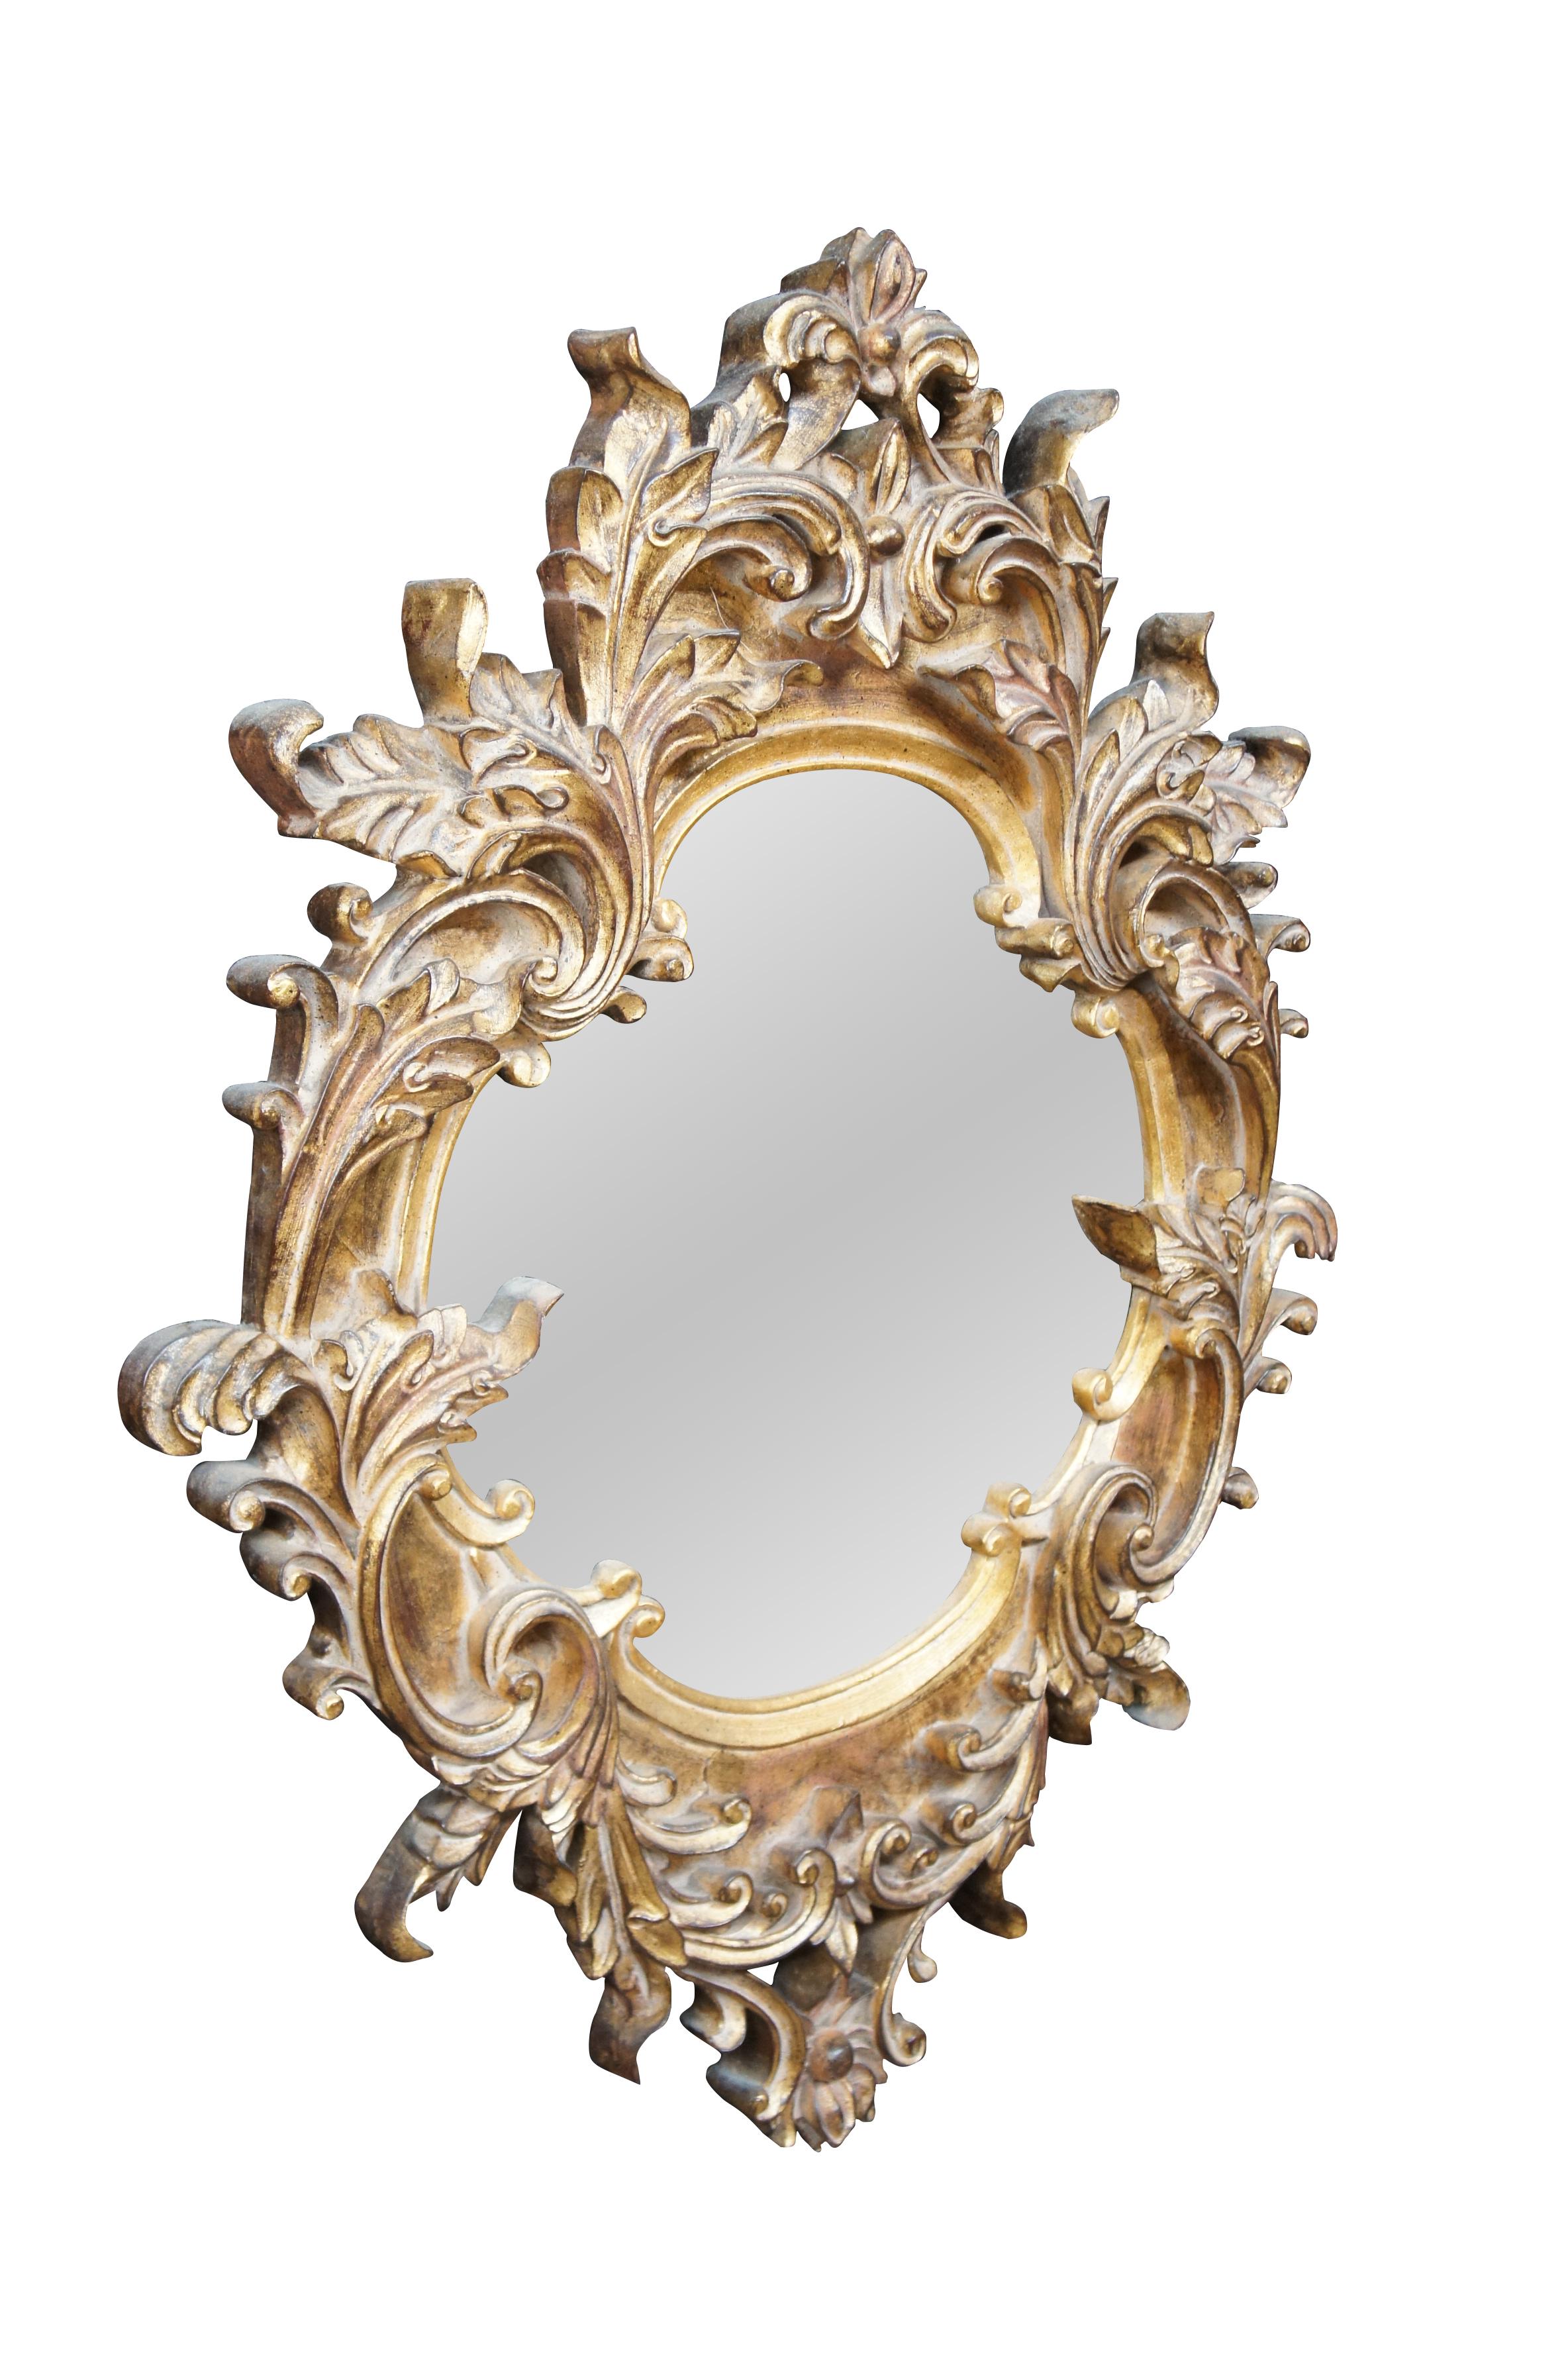 Vintage Raschella Collection wall or vanity mirror featuring Italian Regency styling with ornate Baroque / Rococo florals and acanthus leaves.  Finished in Plum Gold.  The glass is antiqued

Raschella Collection Inc, founded in 1999, is an importer